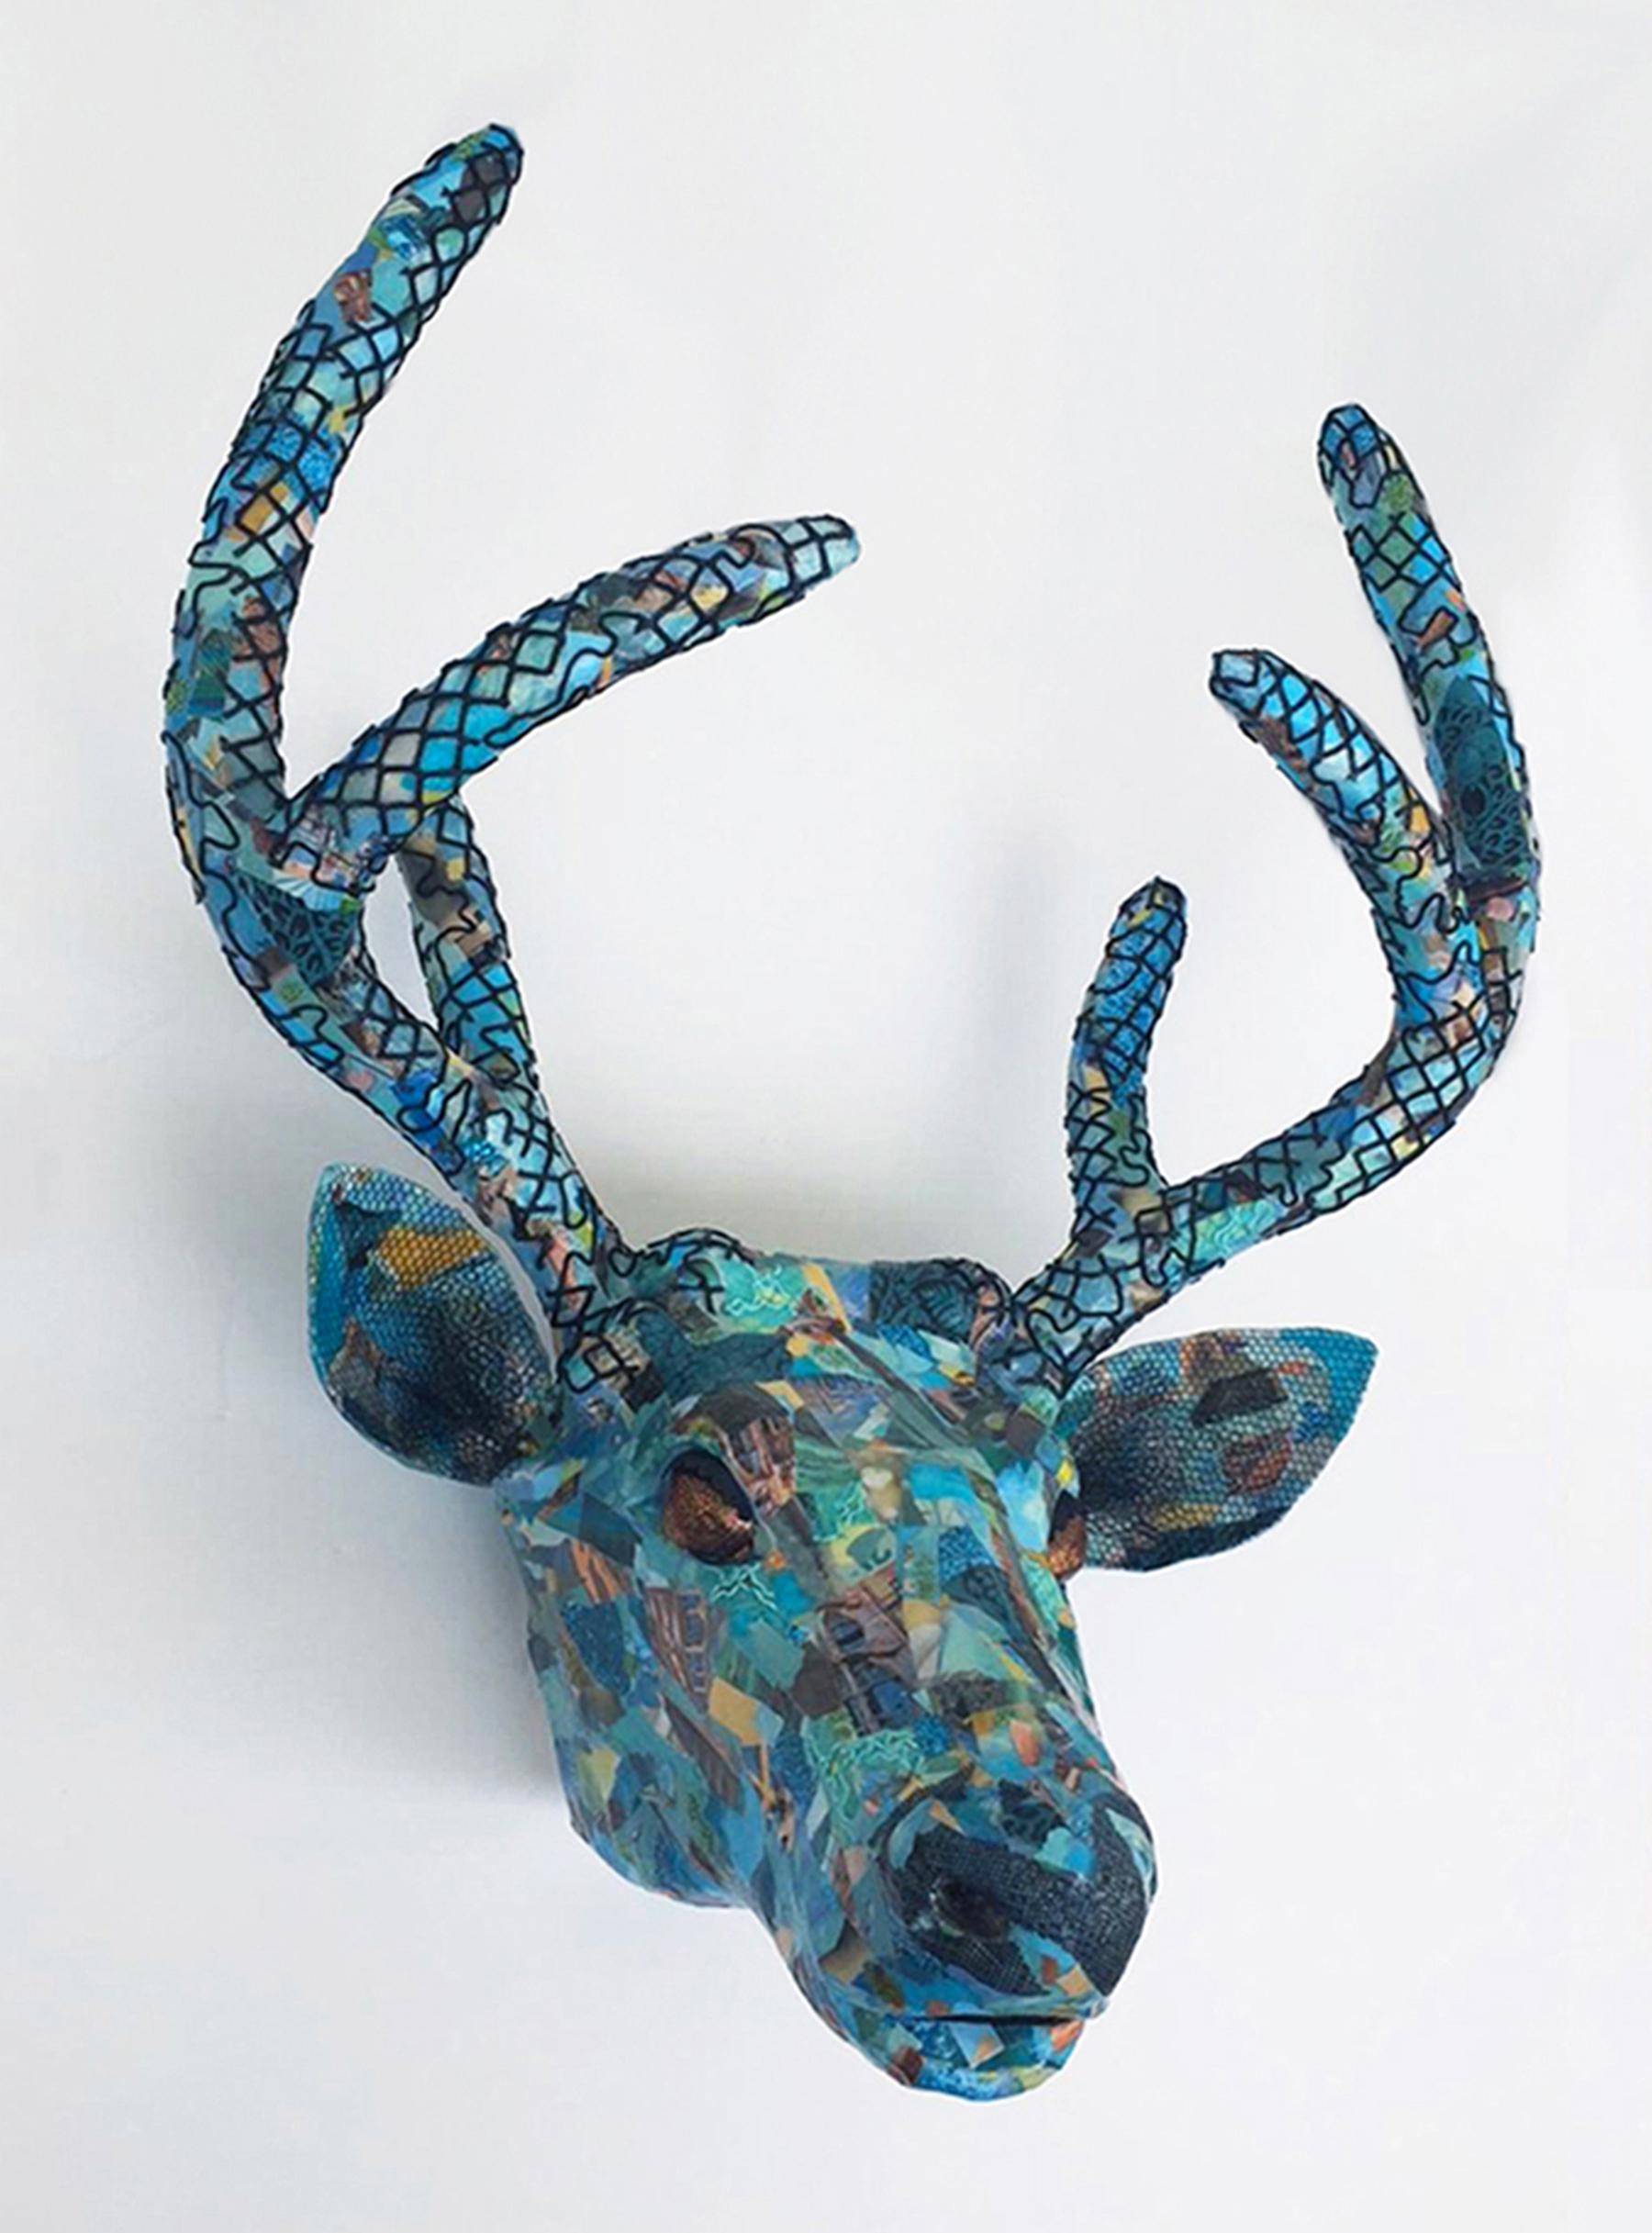 Banff- Beautiful Jeweled, Teal Sculpture of Endangered Deer in Up-Cyled Material - Mixed Media Art by Yulia Shtern